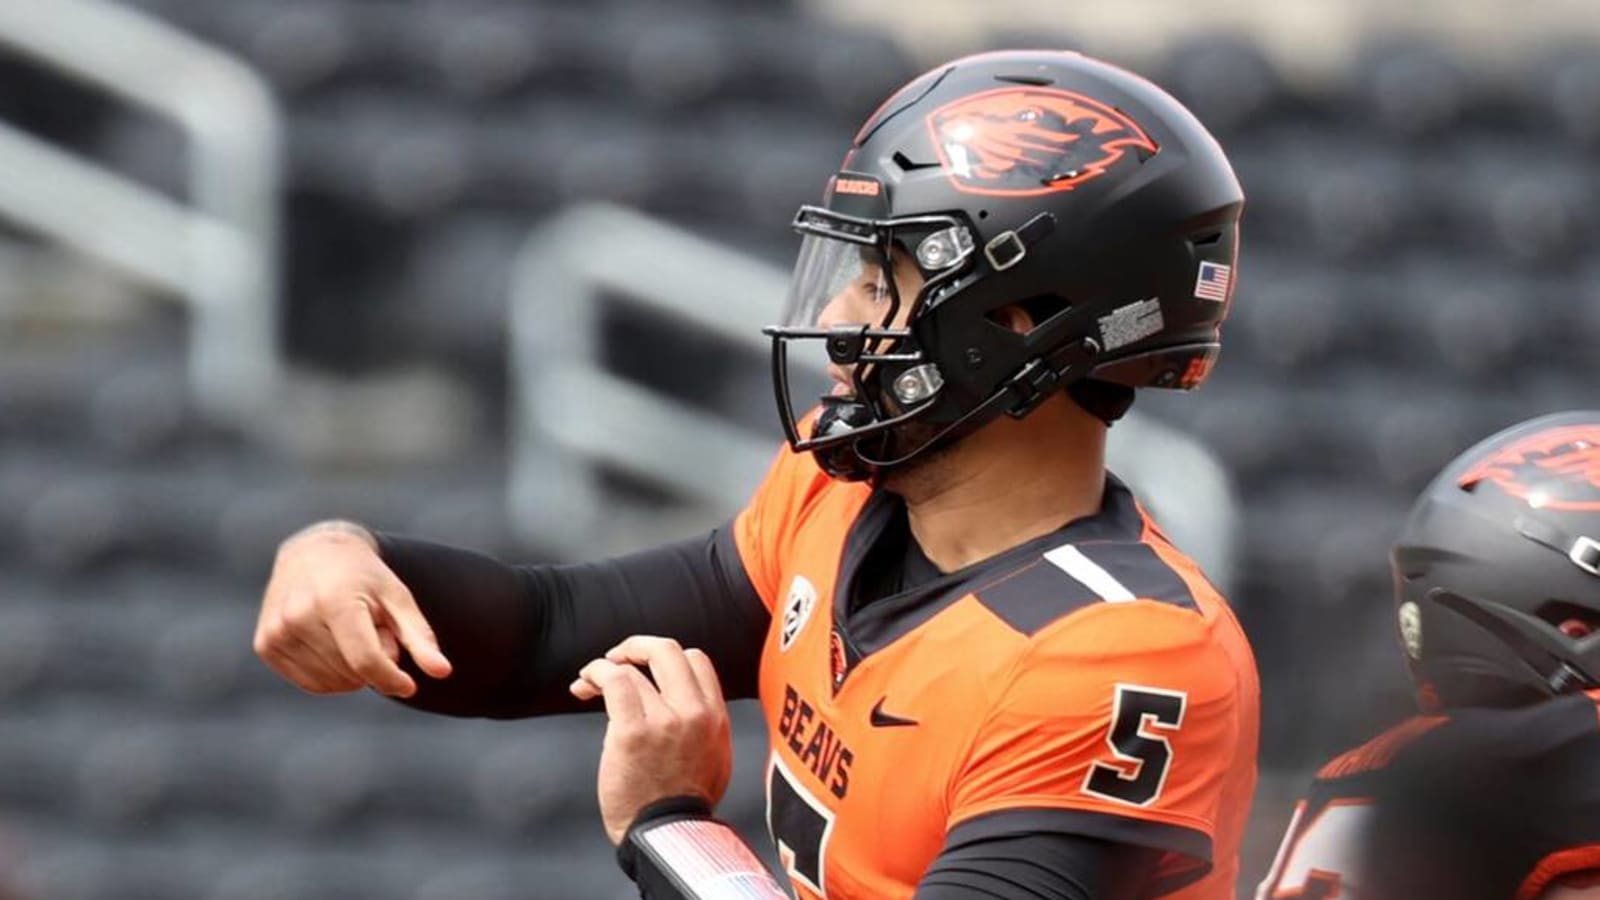 Former five-star Clemson QB makes statement in Oregon State debut